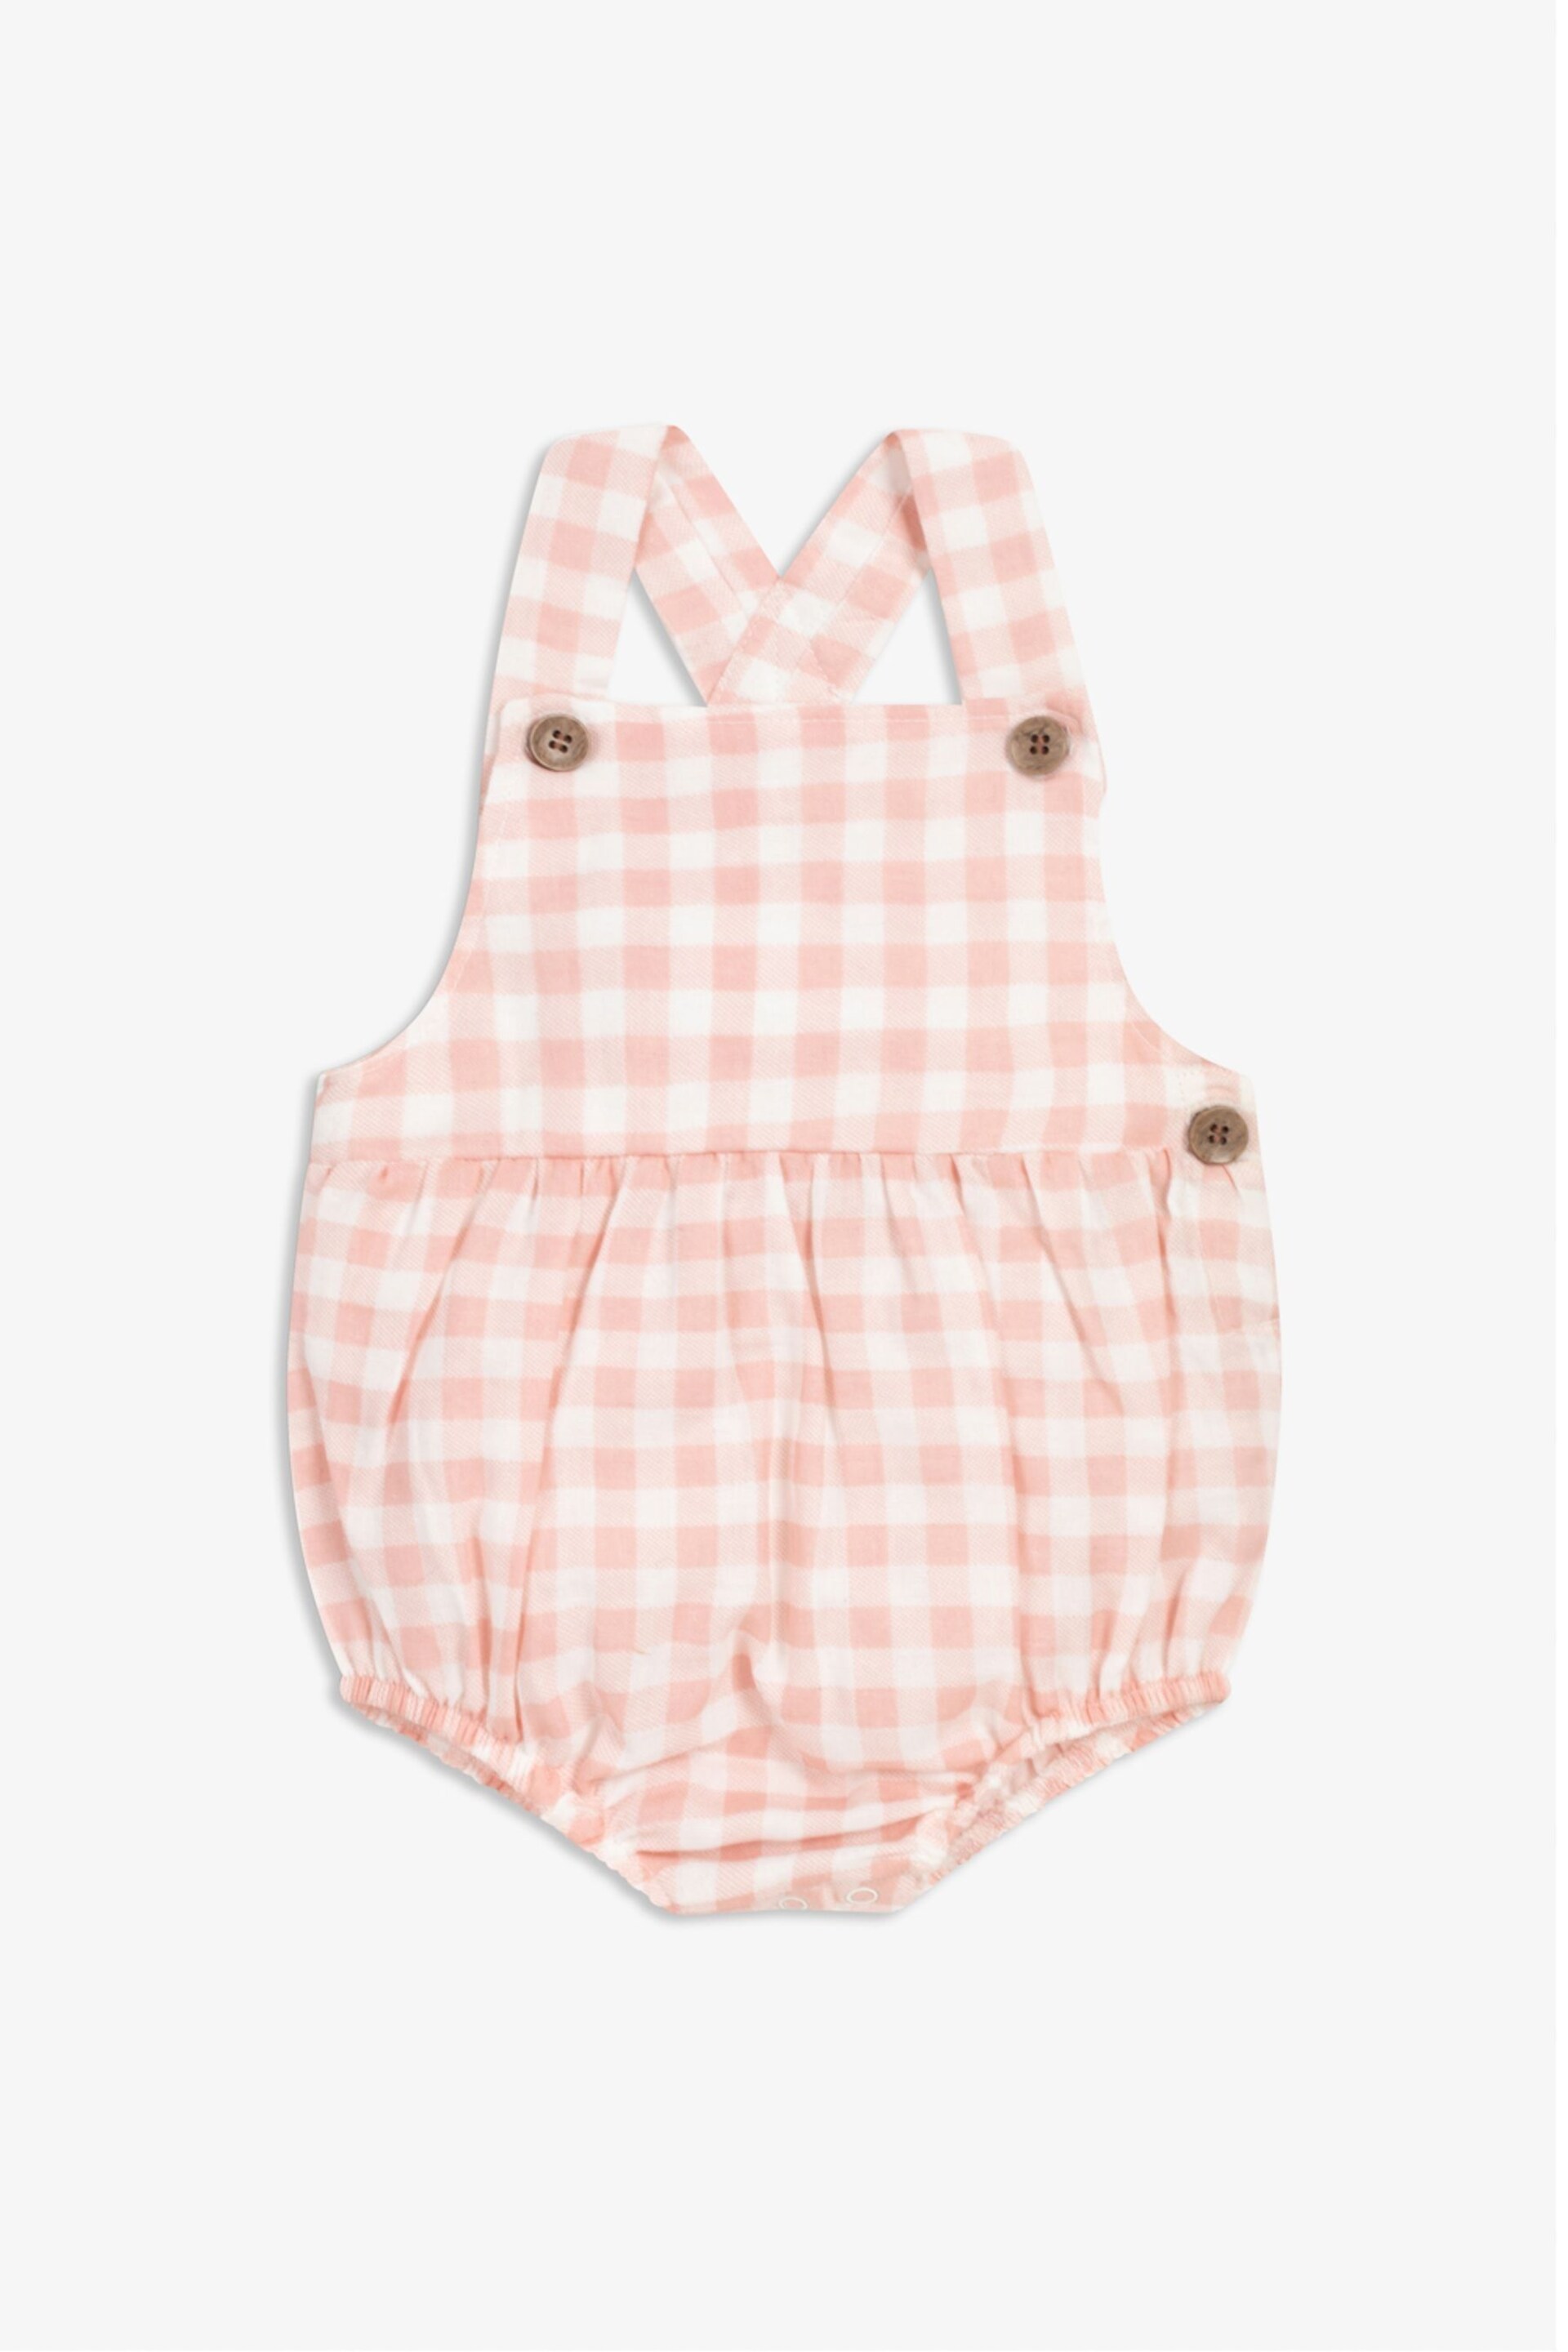 The Little Tailor Baby Woven Shorty Dungarees - Image 1 of 1